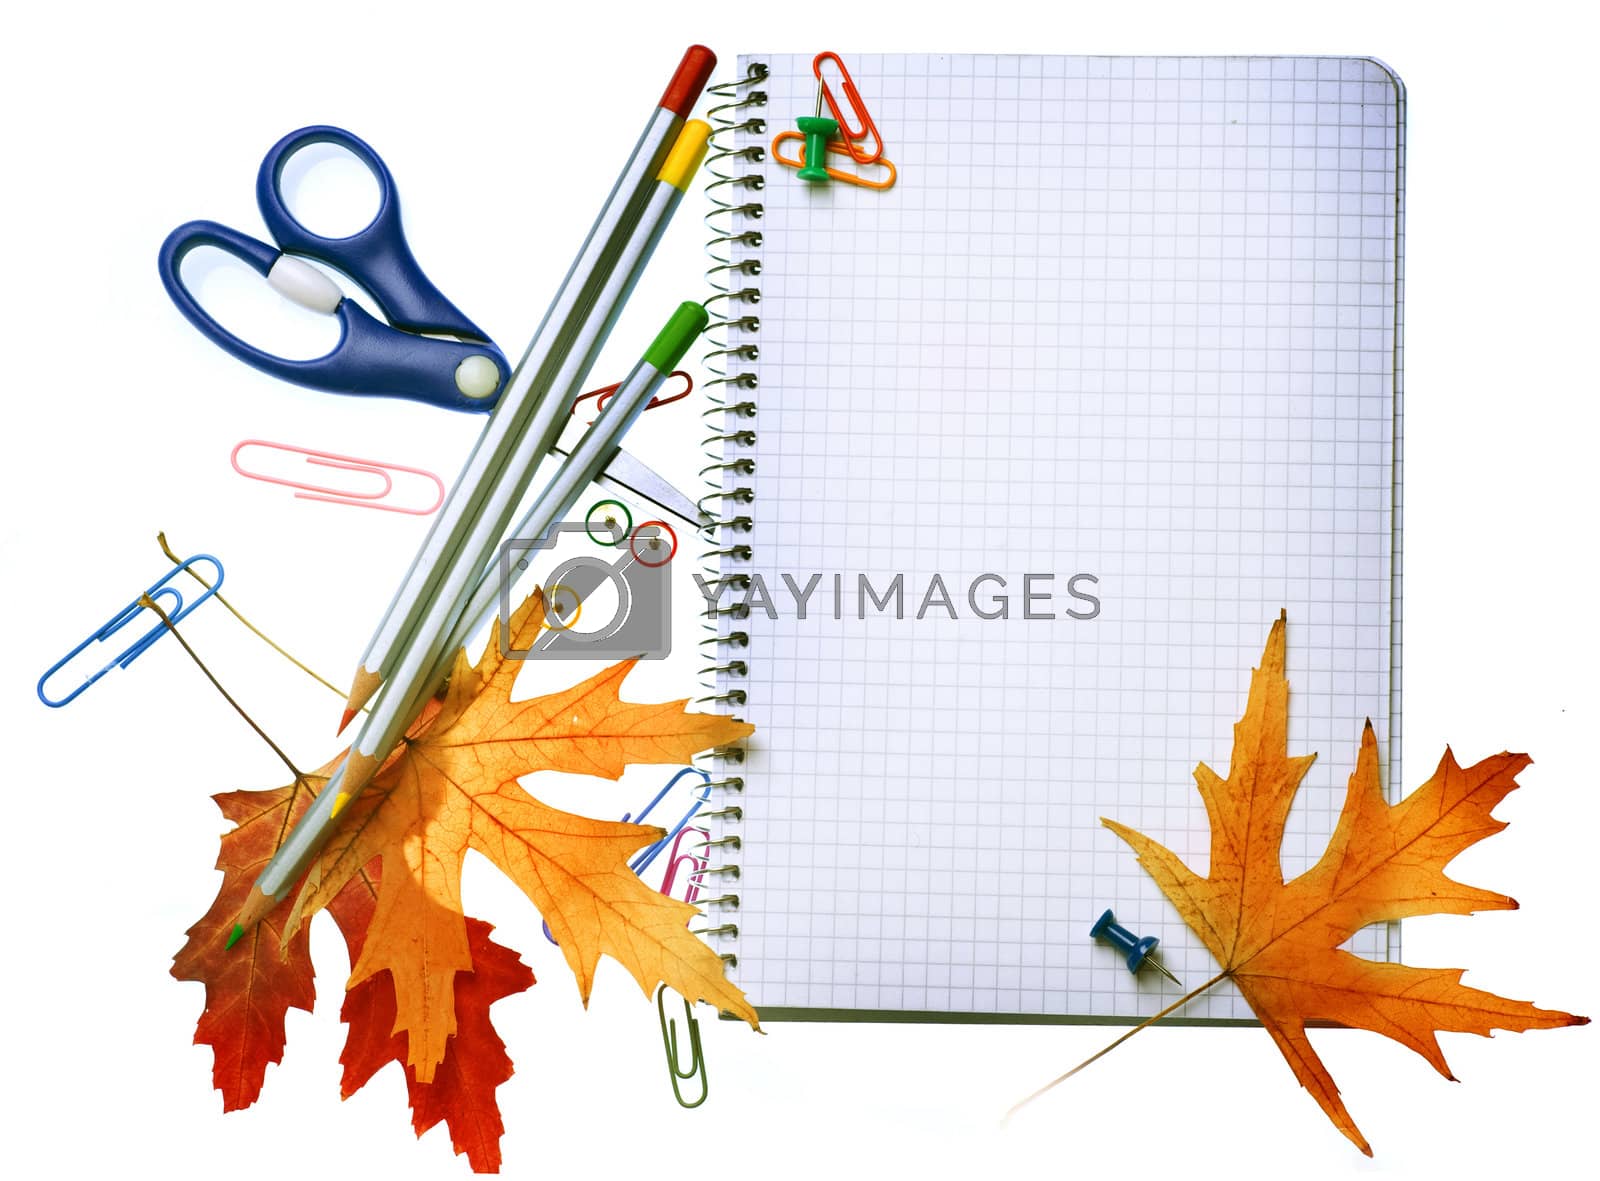 Royalty free image of Back To School Concept Design. Stationery by SubbotinaA